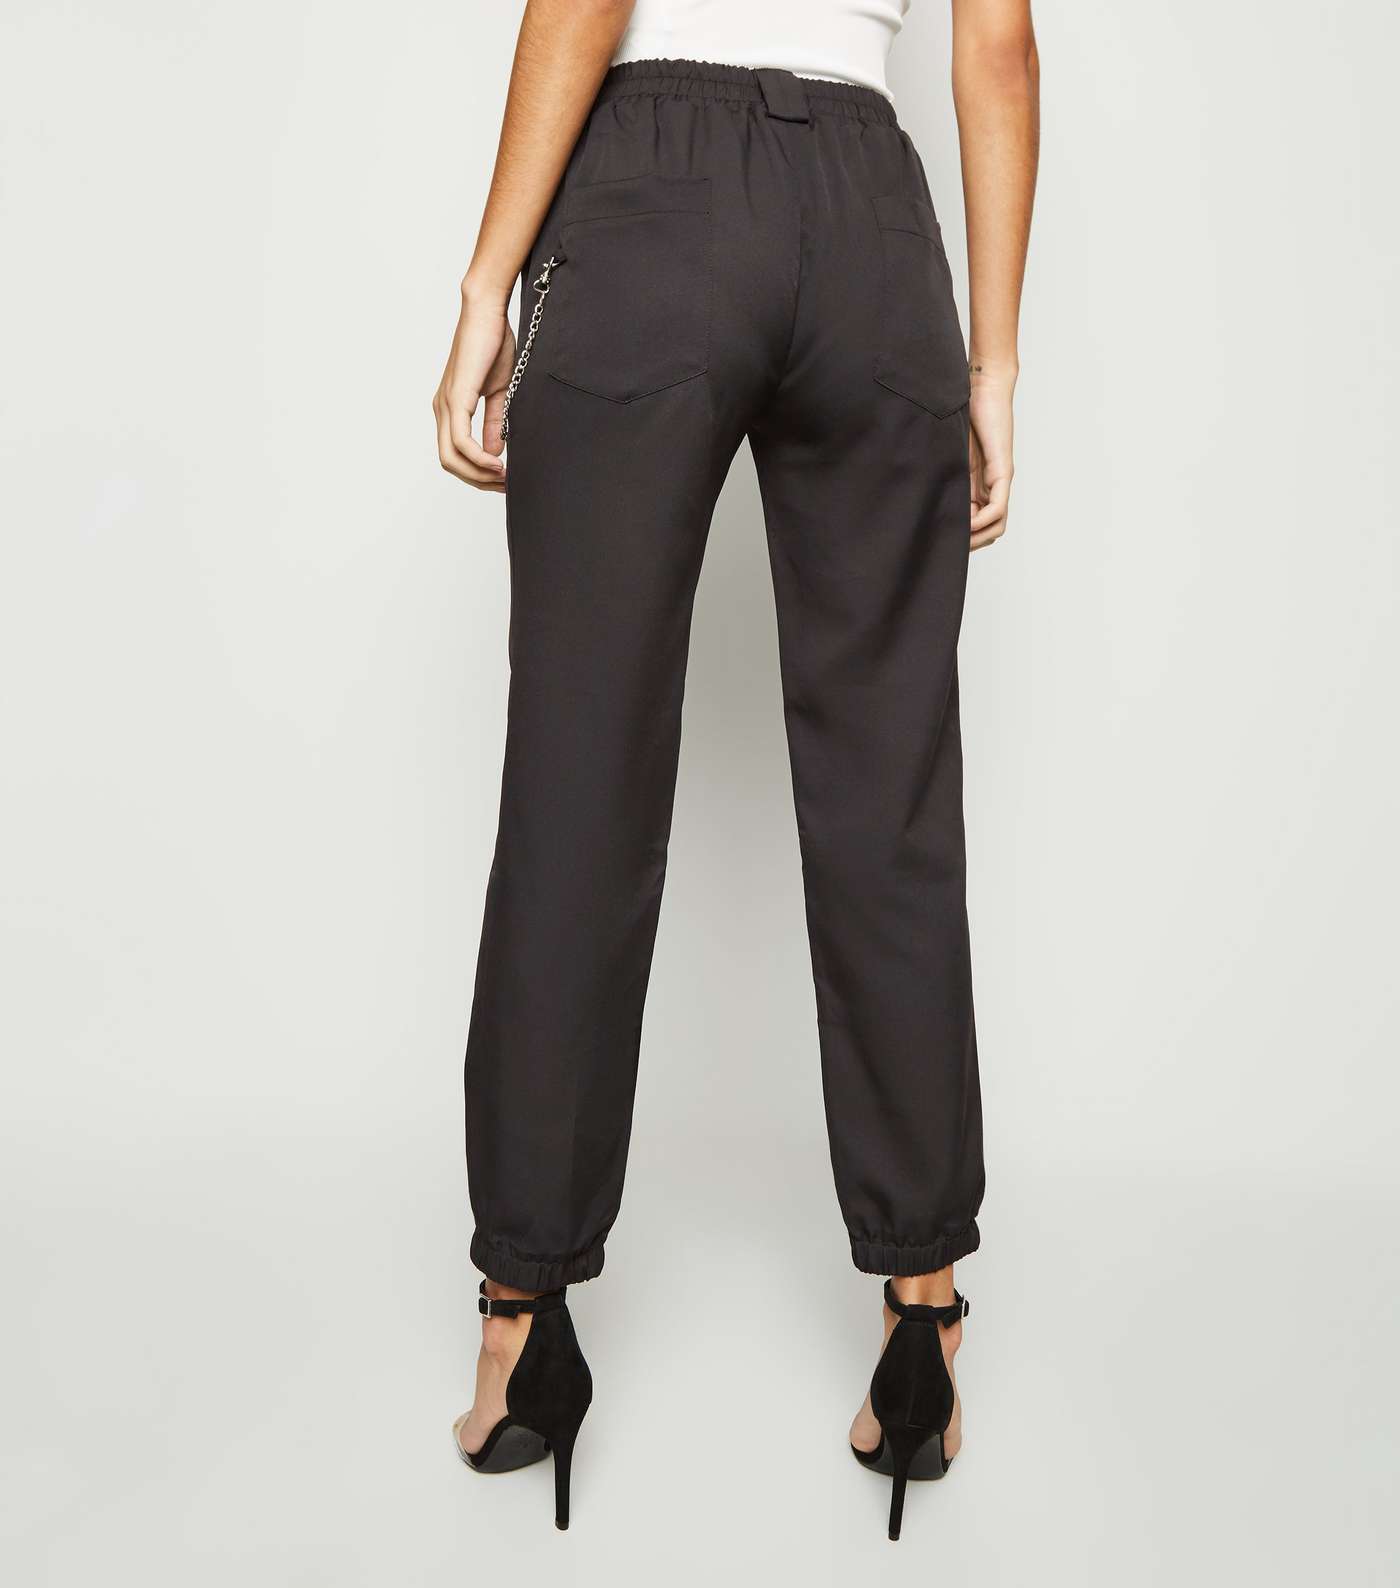 Cameo Rose Black Side Chain Trousers Image 3